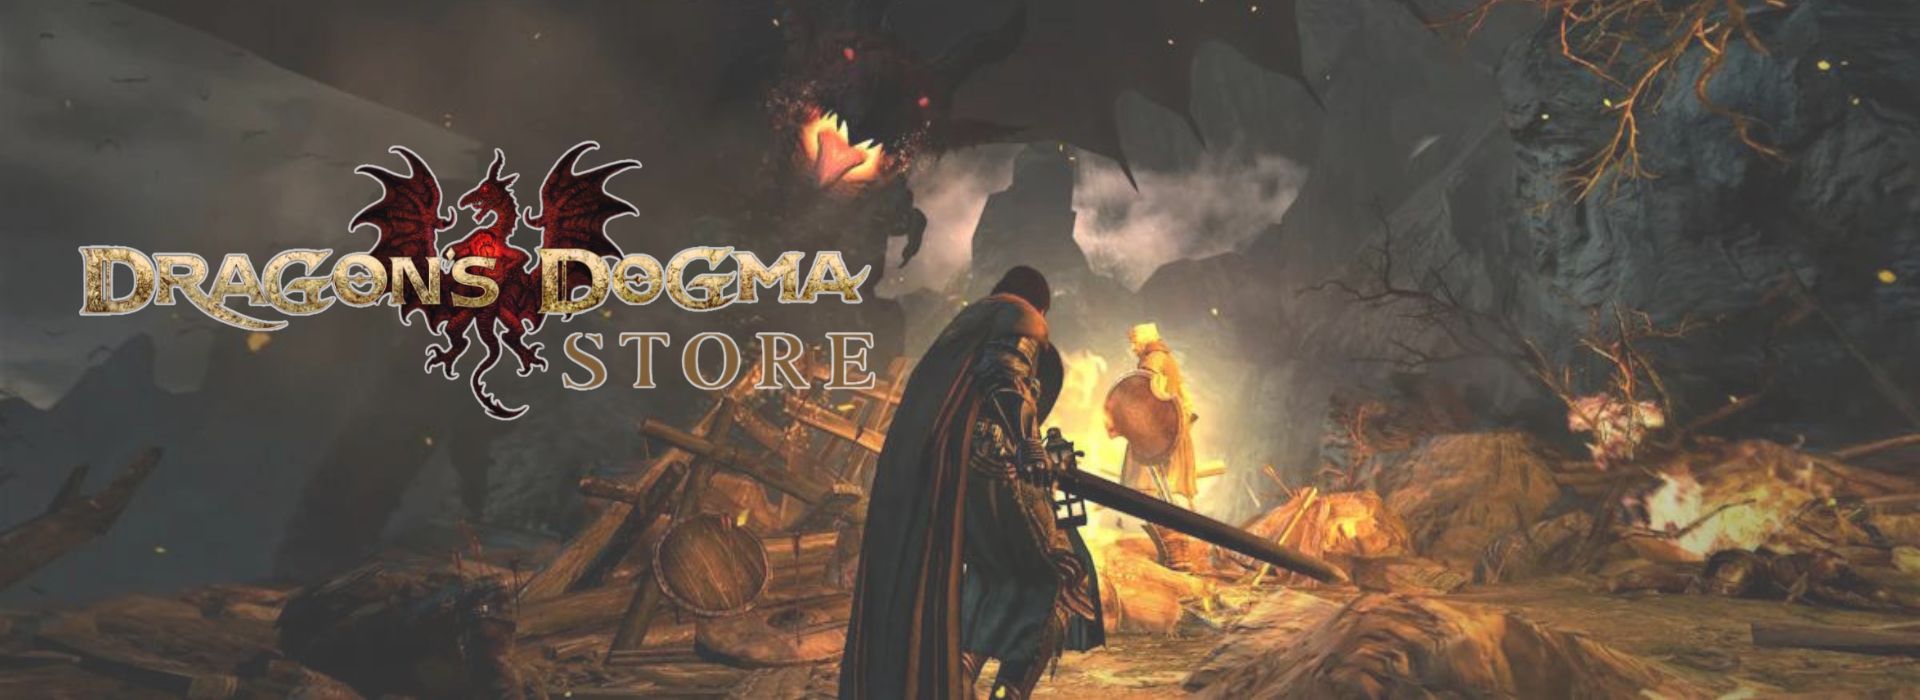 Dragons Dogma Store Banner